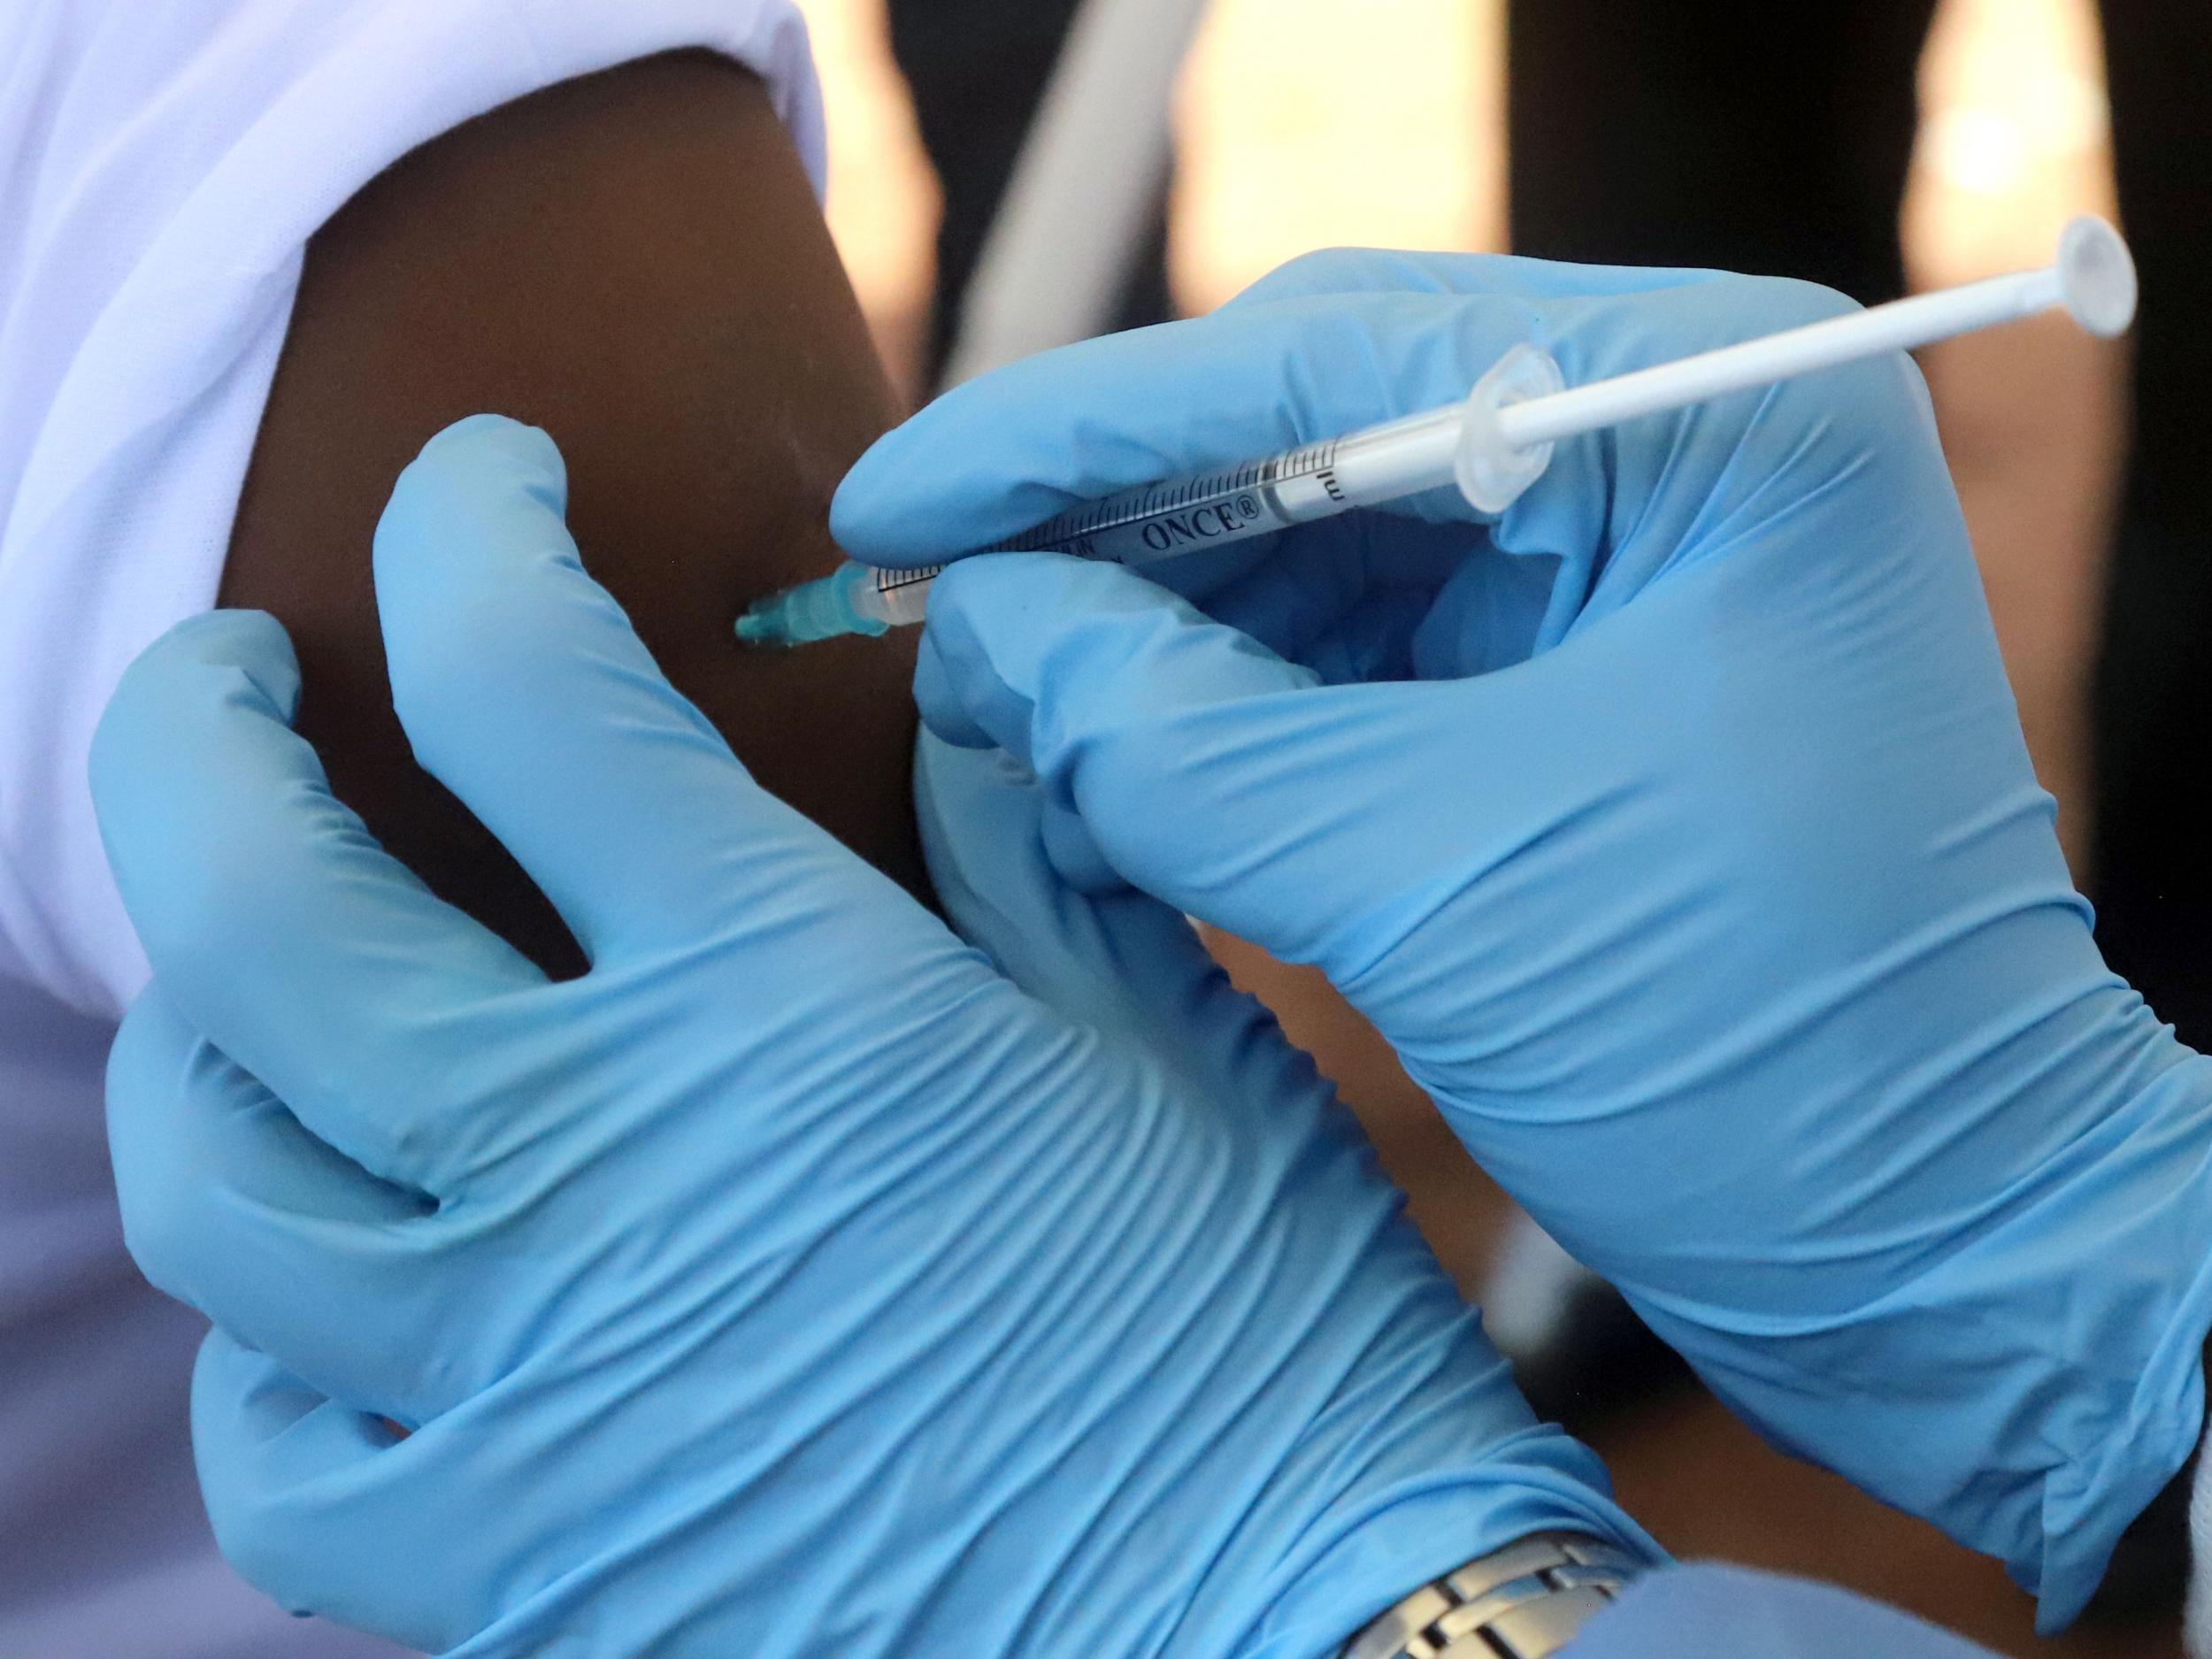 A World Health Organization (WHO) worker administers a vaccination during the launch of a campaign aimed at beating an outbreak of Ebola in the port city of Mbandaka, Democratic Republic of Congo May 21, 2018